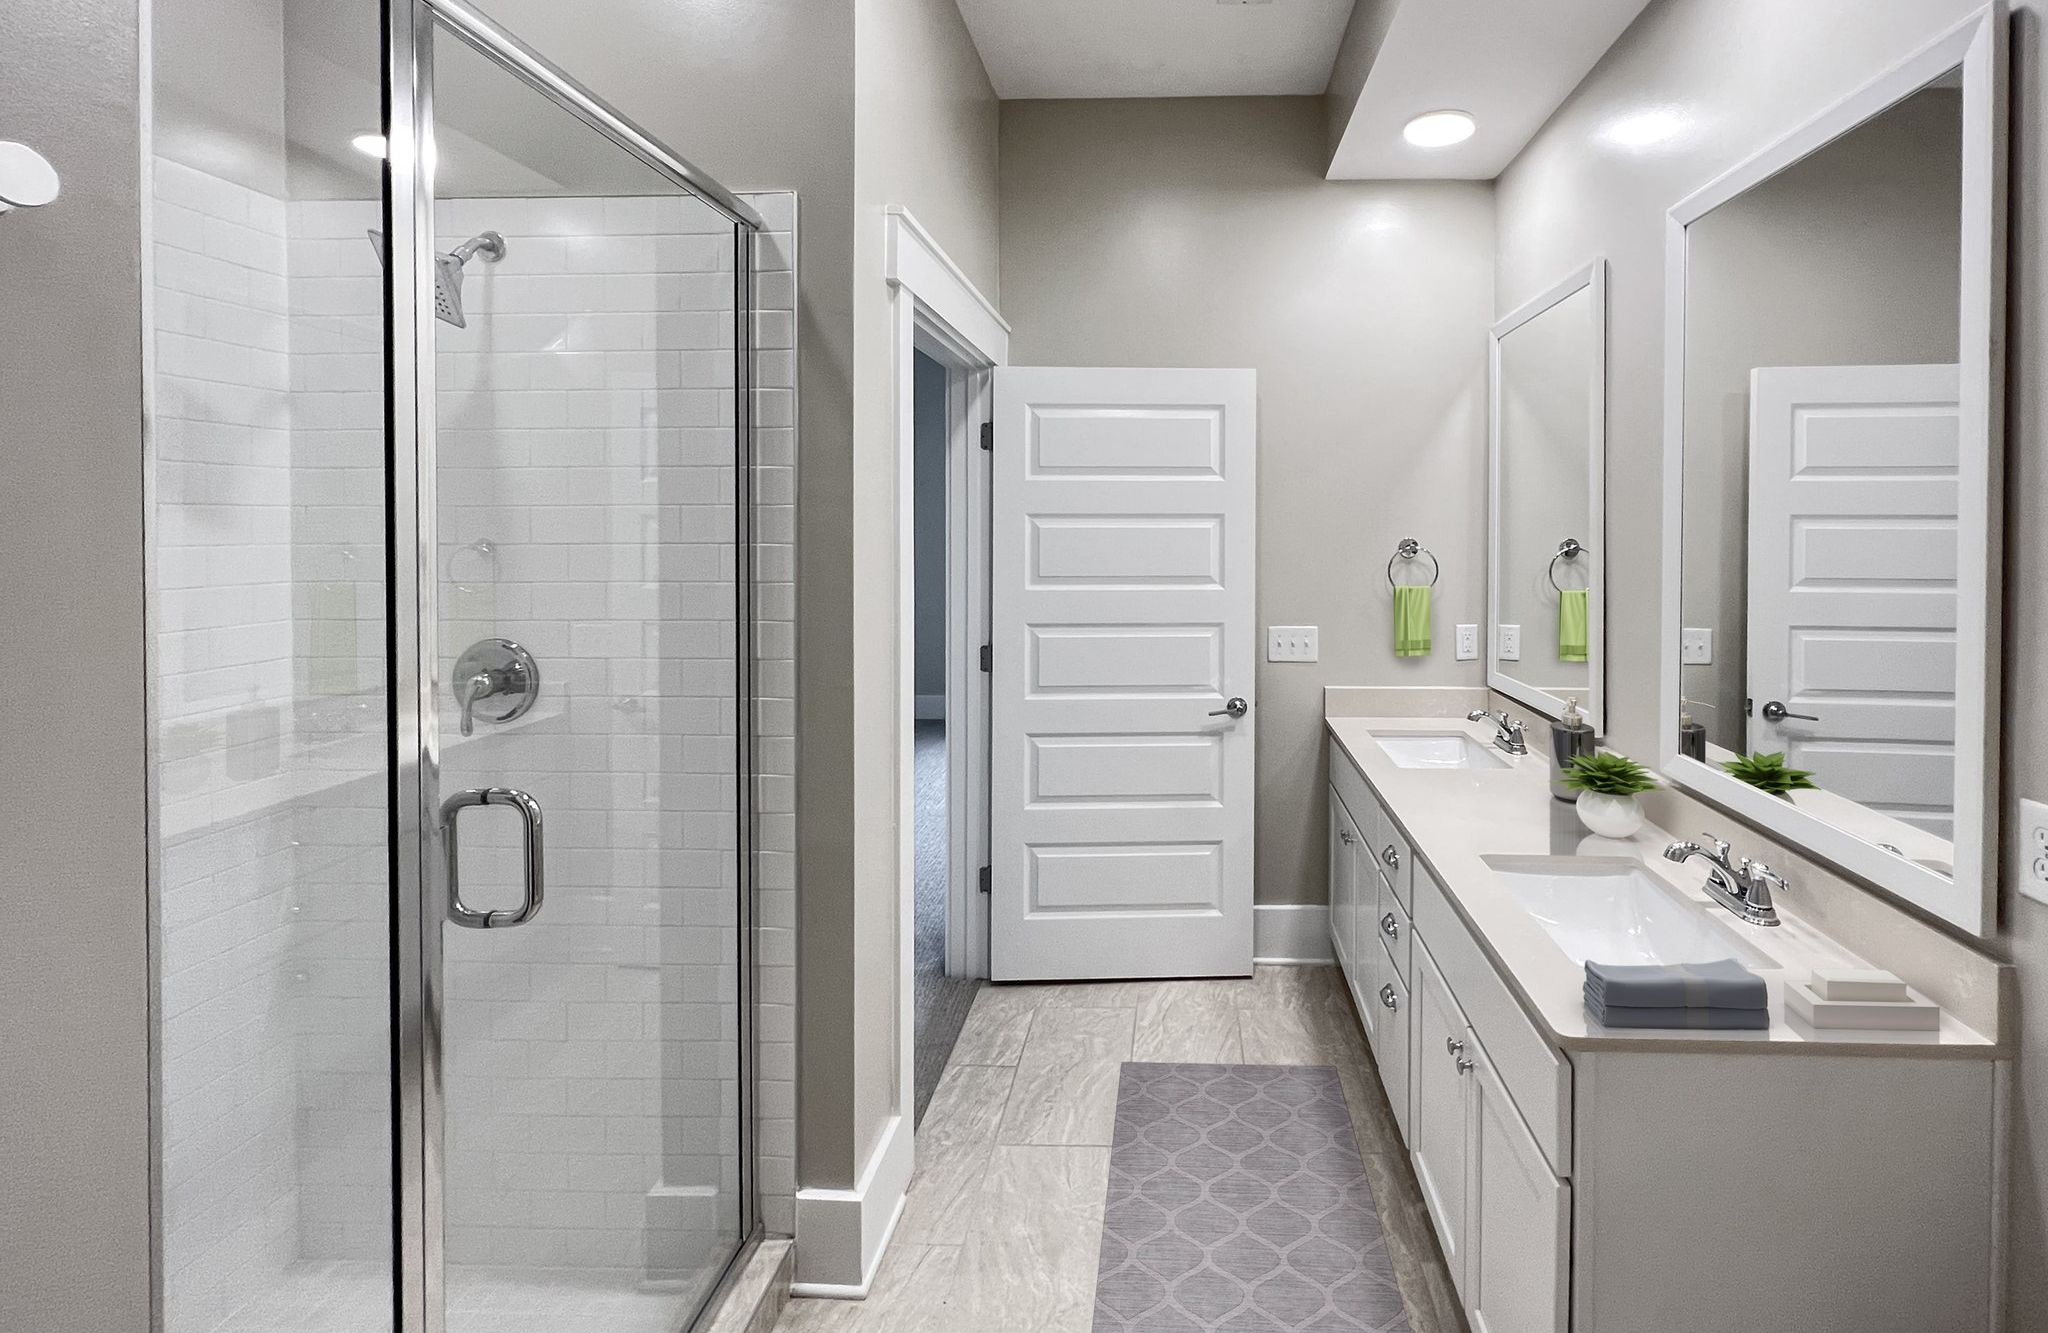 Spacious apartment bathroom with glass-enclosed shower, rain showerhead, and double vanities